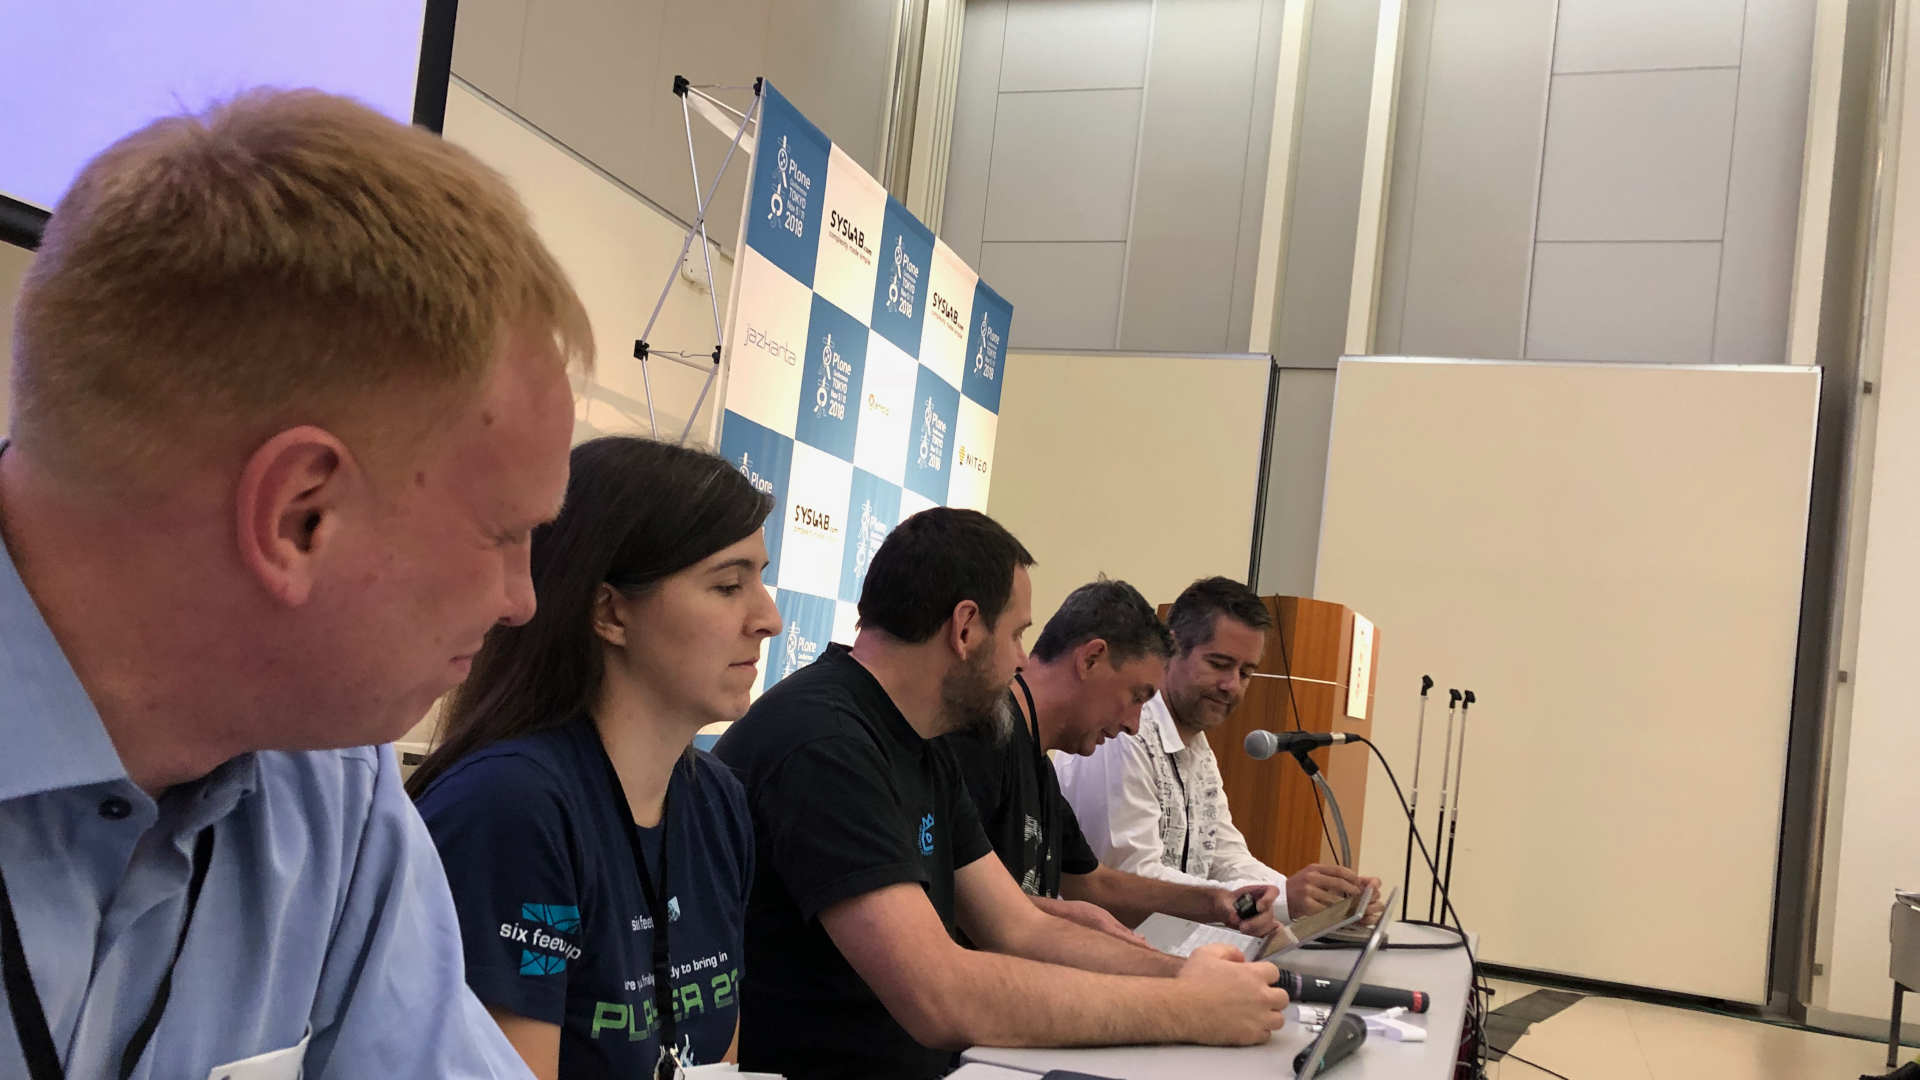 Board meeting at Plone Conference 2018